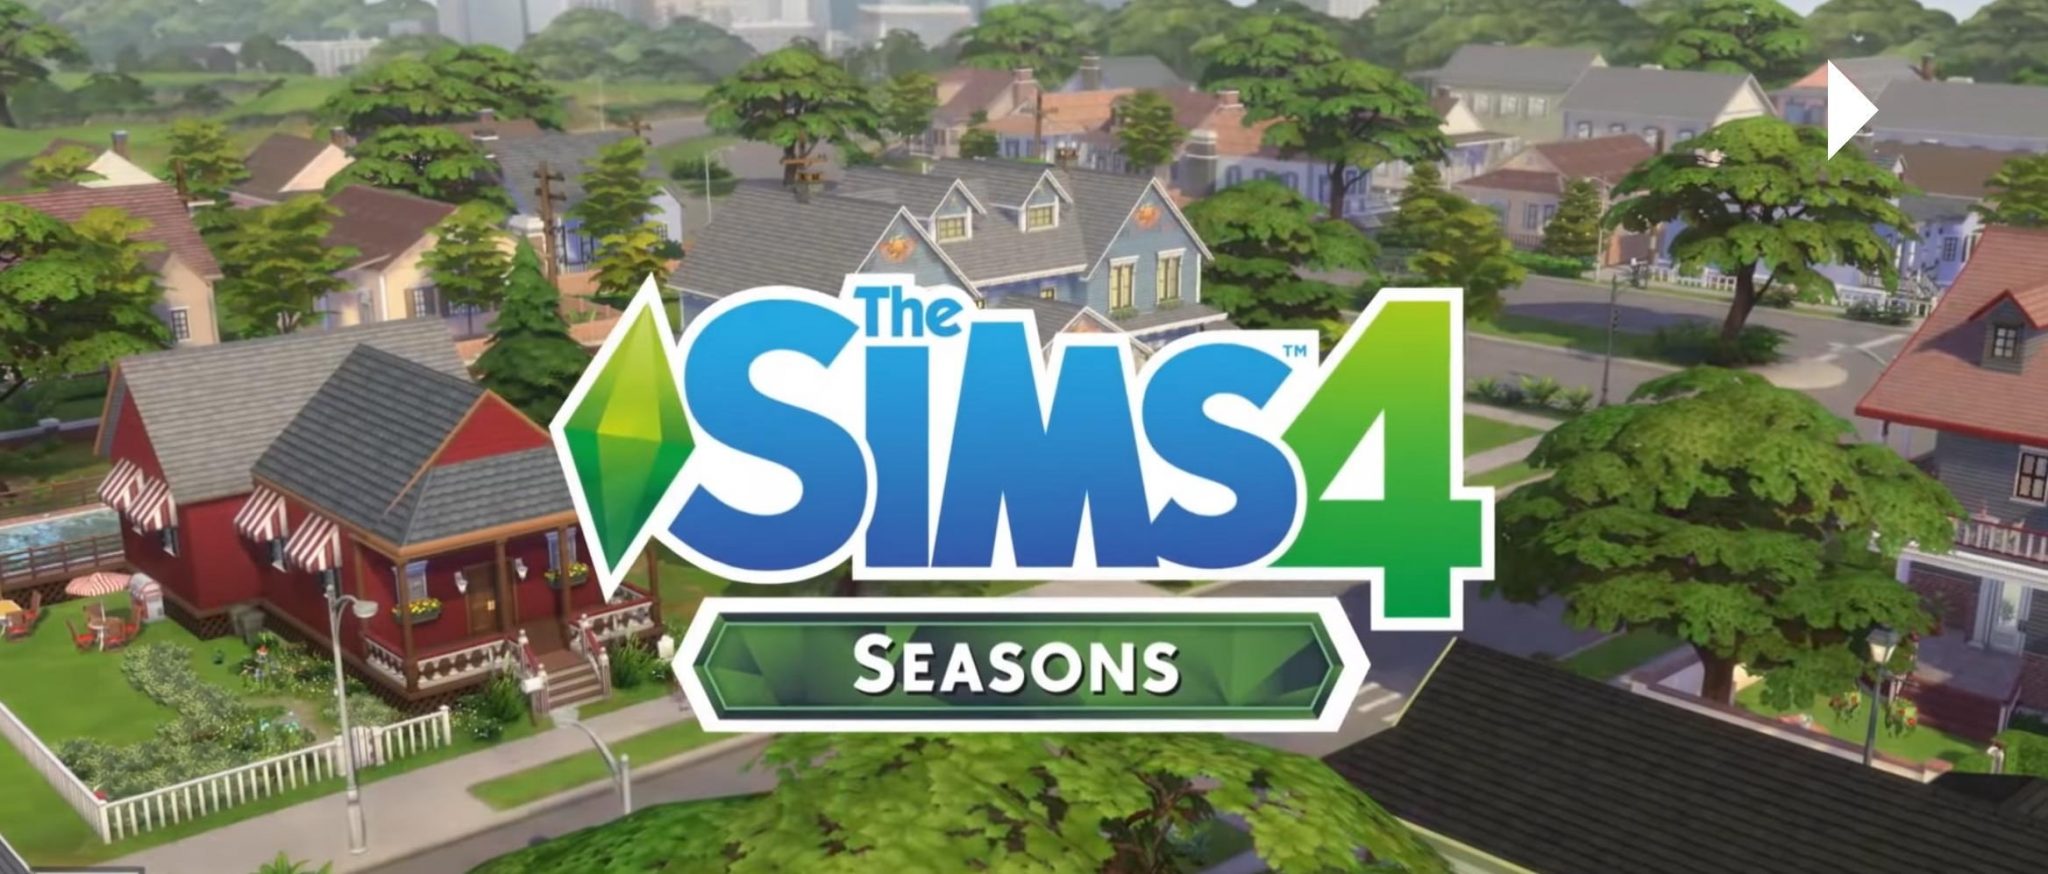 The Sims 4 Seasons Full Version PC Game Download